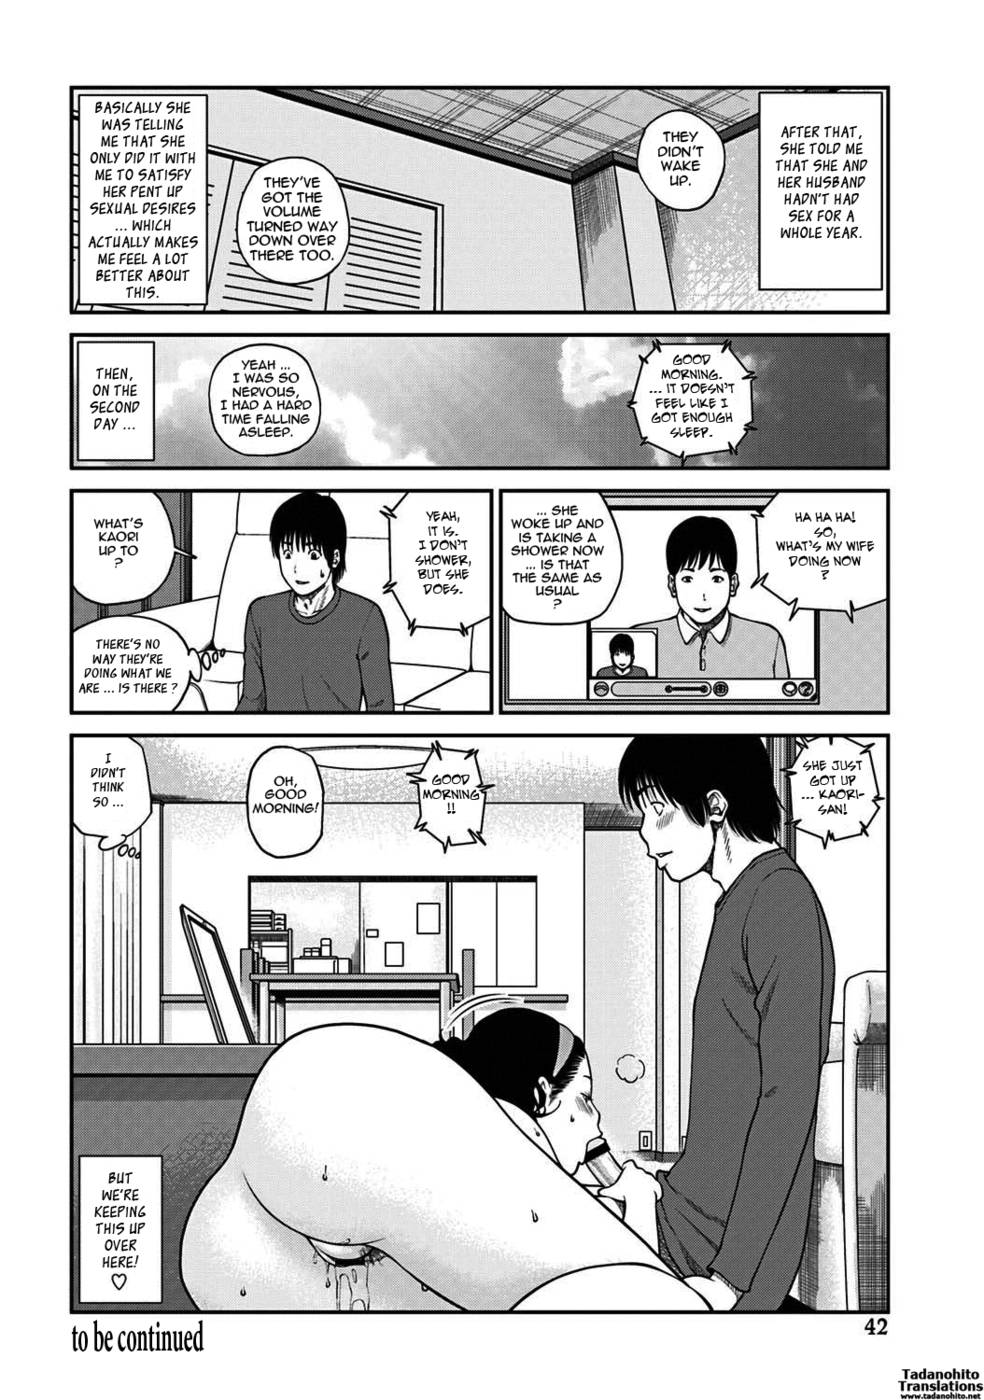 33 Year Old Unsatisfied Wife-Chapter 2-Spouse Swapping-First Night-Hentai Manga Hentai Comic pic photo